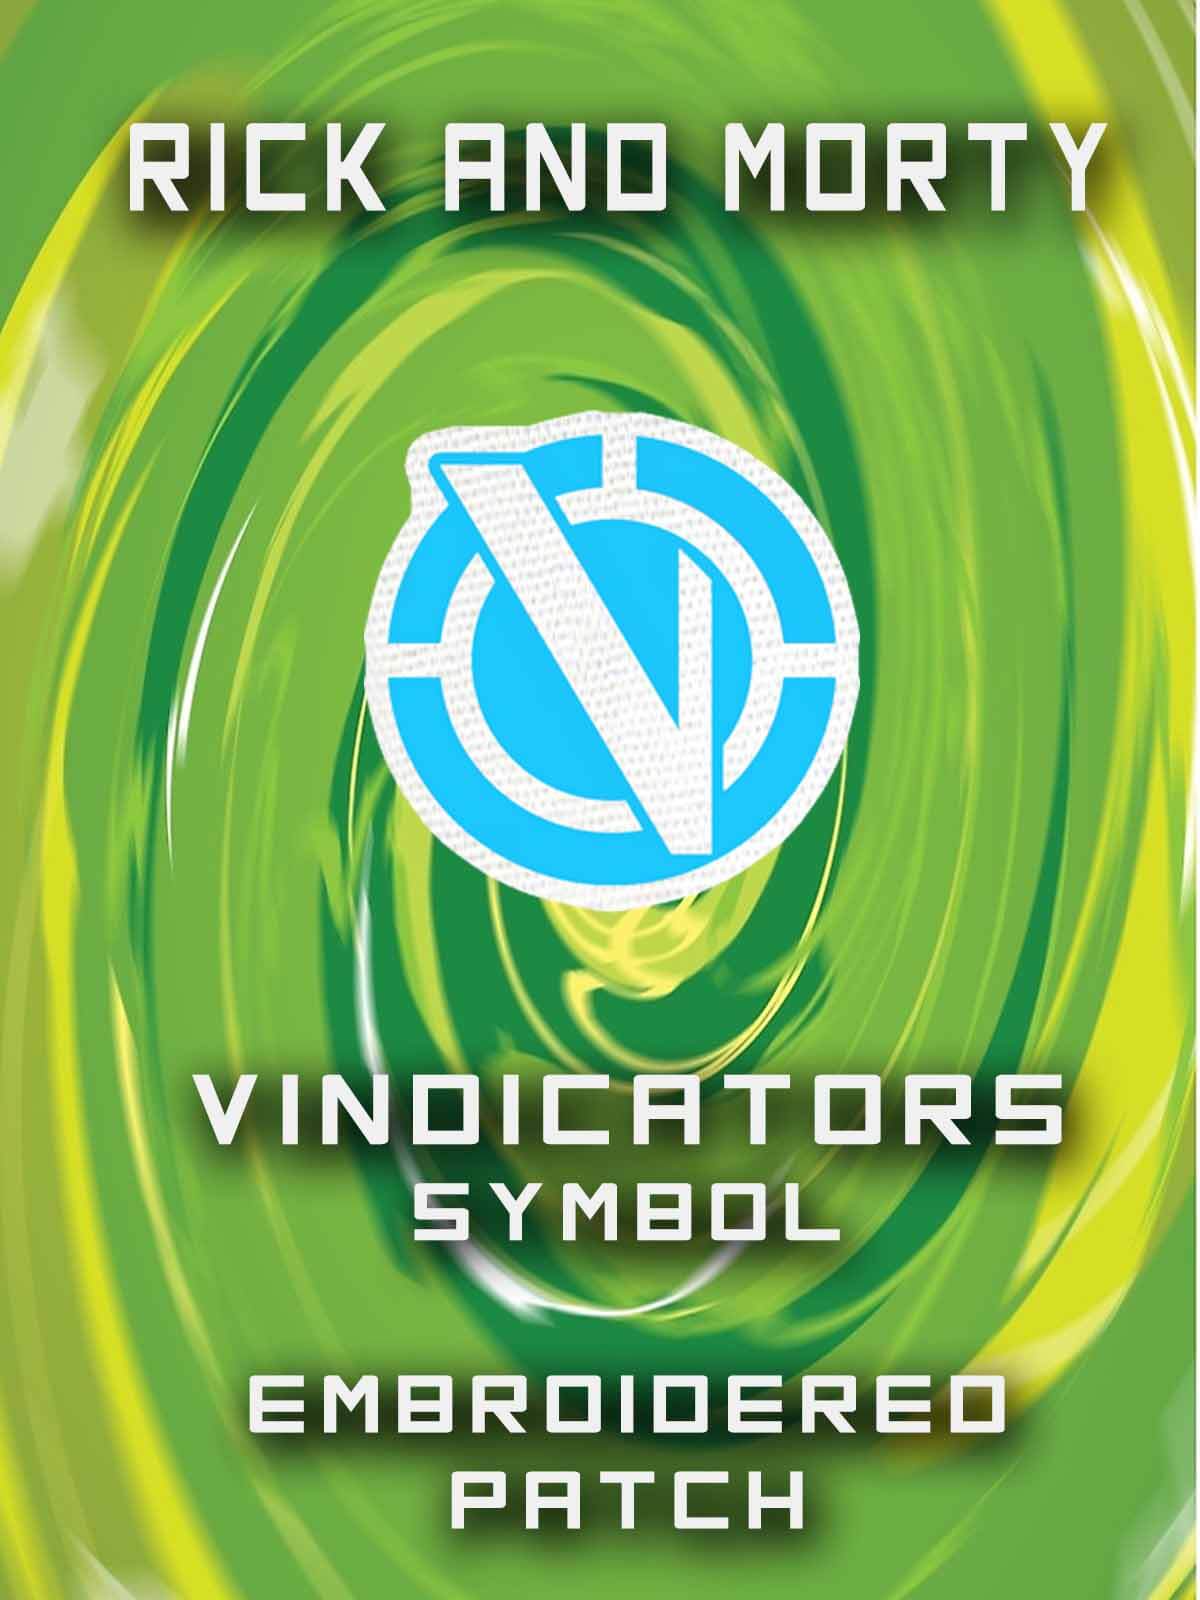 Rick and Morty - Vindicators Symbol Embroidered Iron On Patch